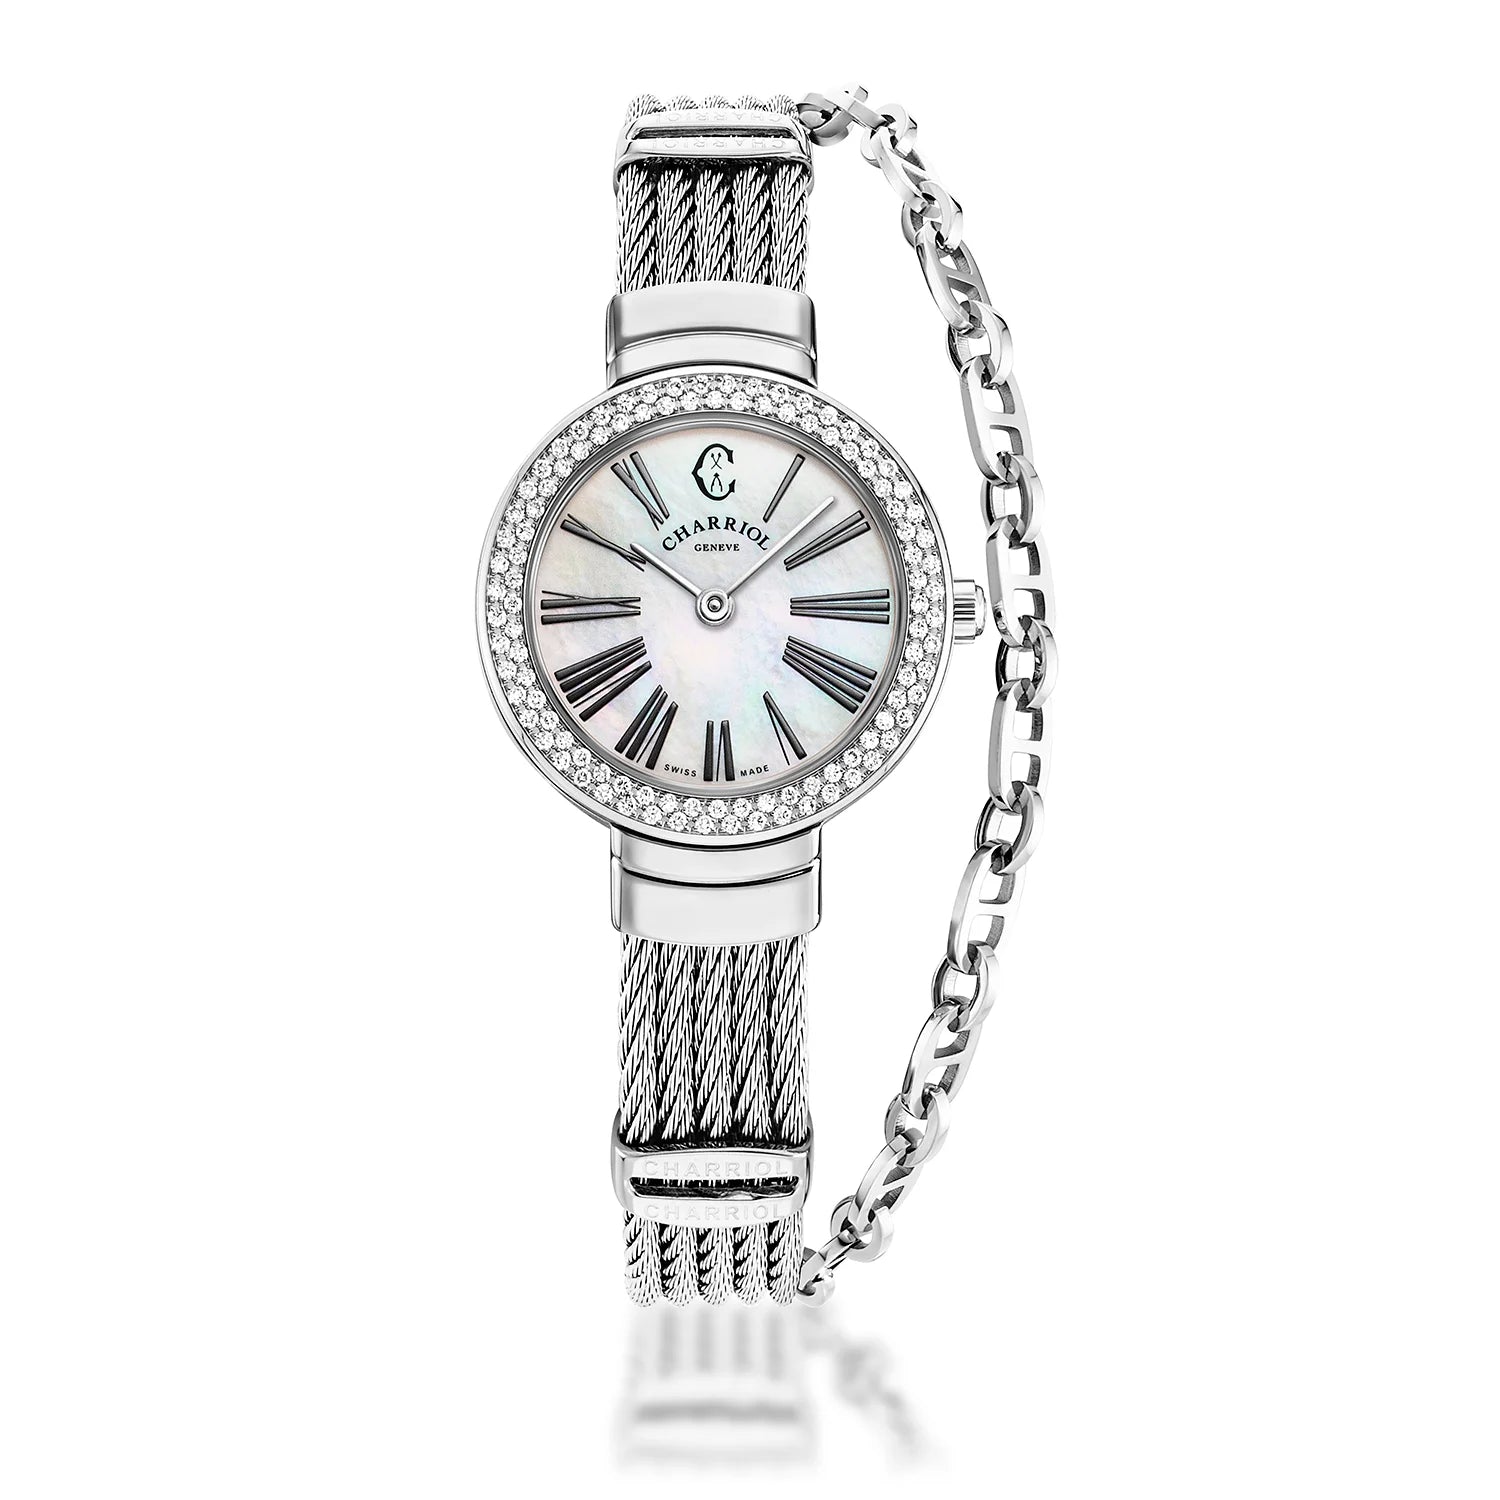 ST TROPEZ, 25MM, QUARTZ CALIBRE, WHITE MOTHER-OF-PEARL WITH ROMAN NUMERALS DIAL, STEEL WITH 104 DIAMONDS BEZEL, STEEL CABLE BRACELET - Charriol Geneve -  Watch